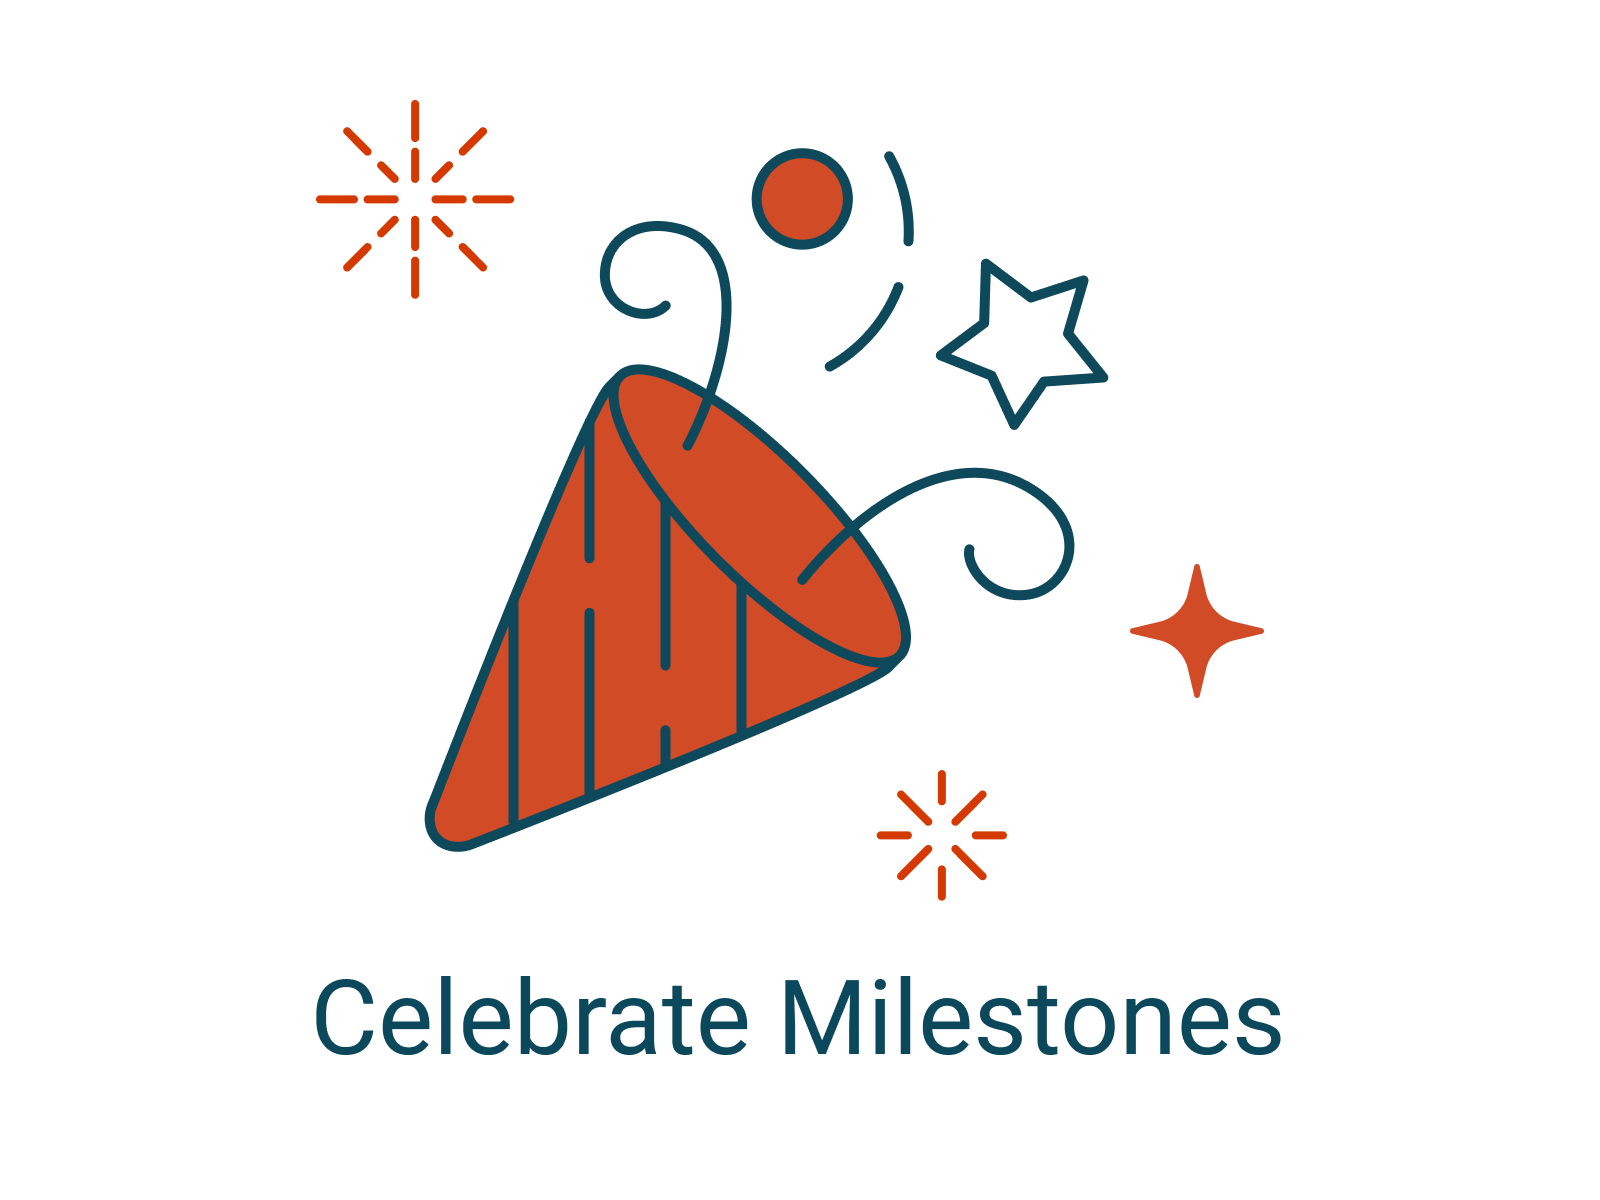 Illustration of the 'tada' icon with the words "Celebrate Milestones" underneath.